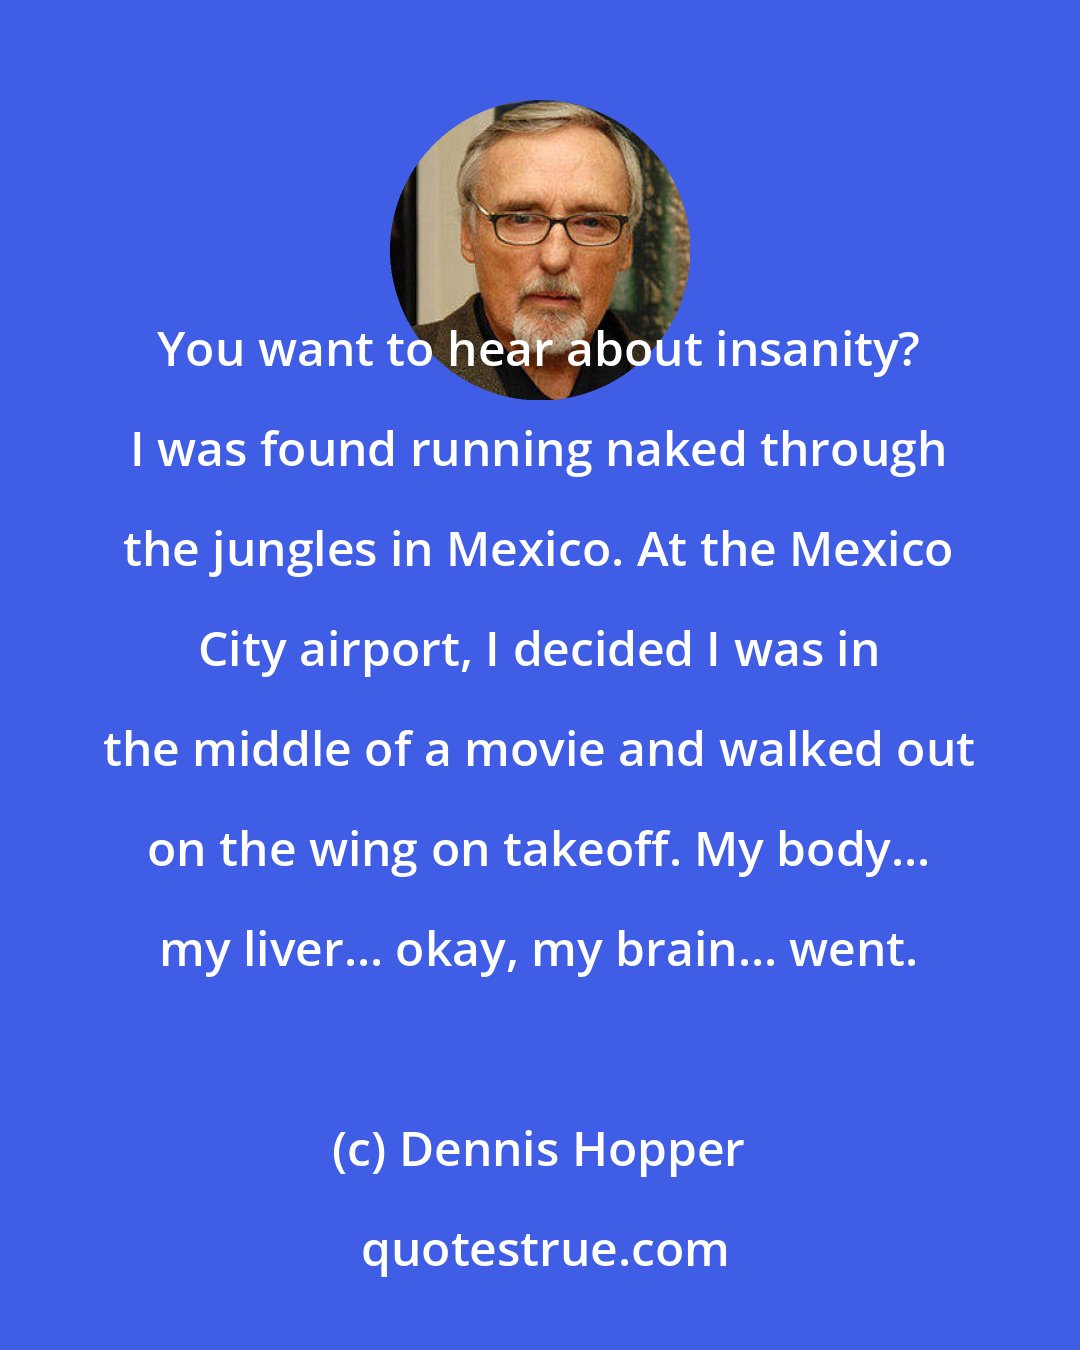 Dennis Hopper: You want to hear about insanity? I was found running naked through the jungles in Mexico. At the Mexico City airport, I decided I was in the middle of a movie and walked out on the wing on takeoff. My body... my liver... okay, my brain... went.